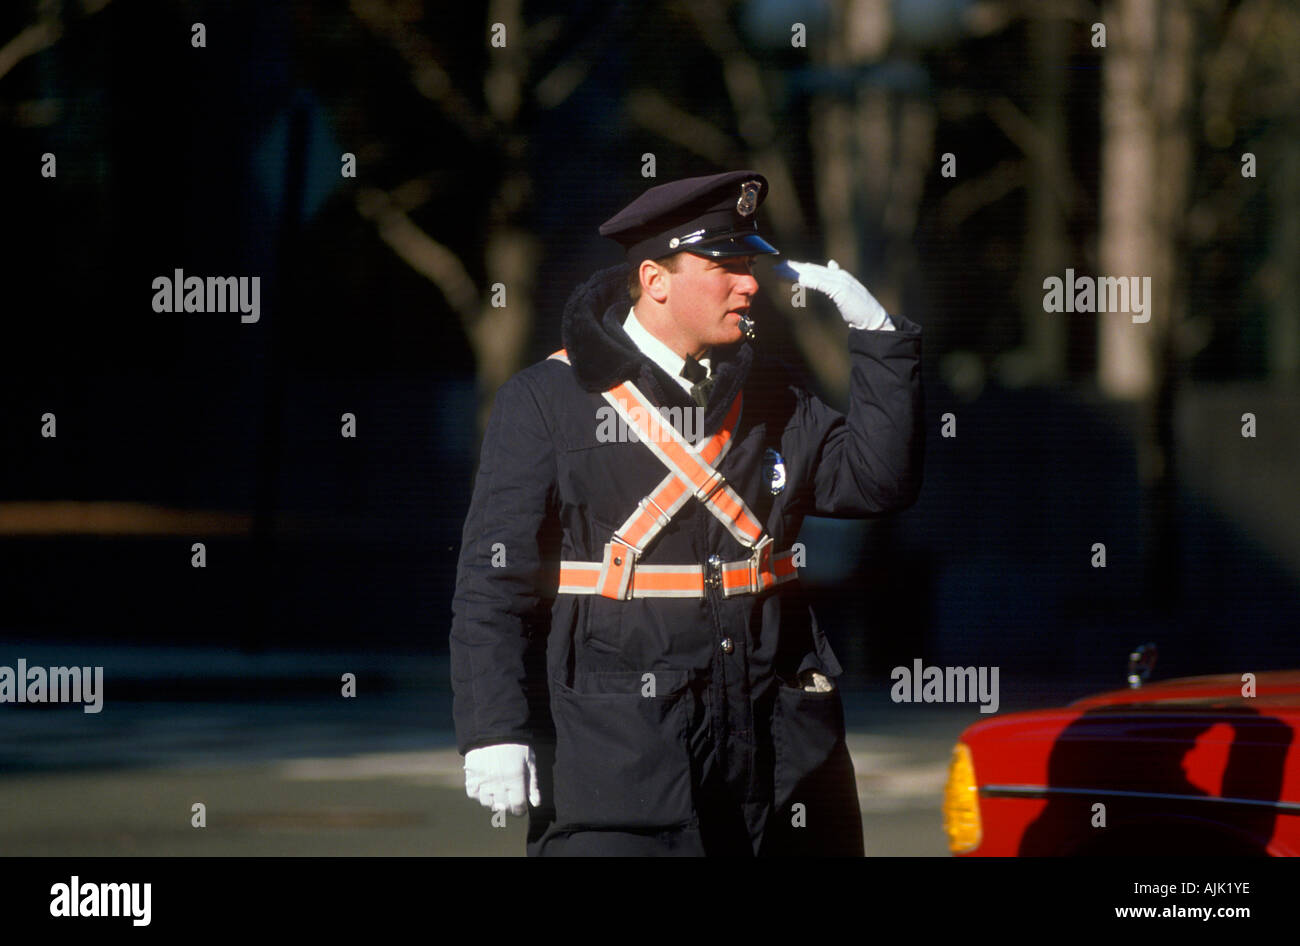 Police officer directing traffic in Boston Stock Photo